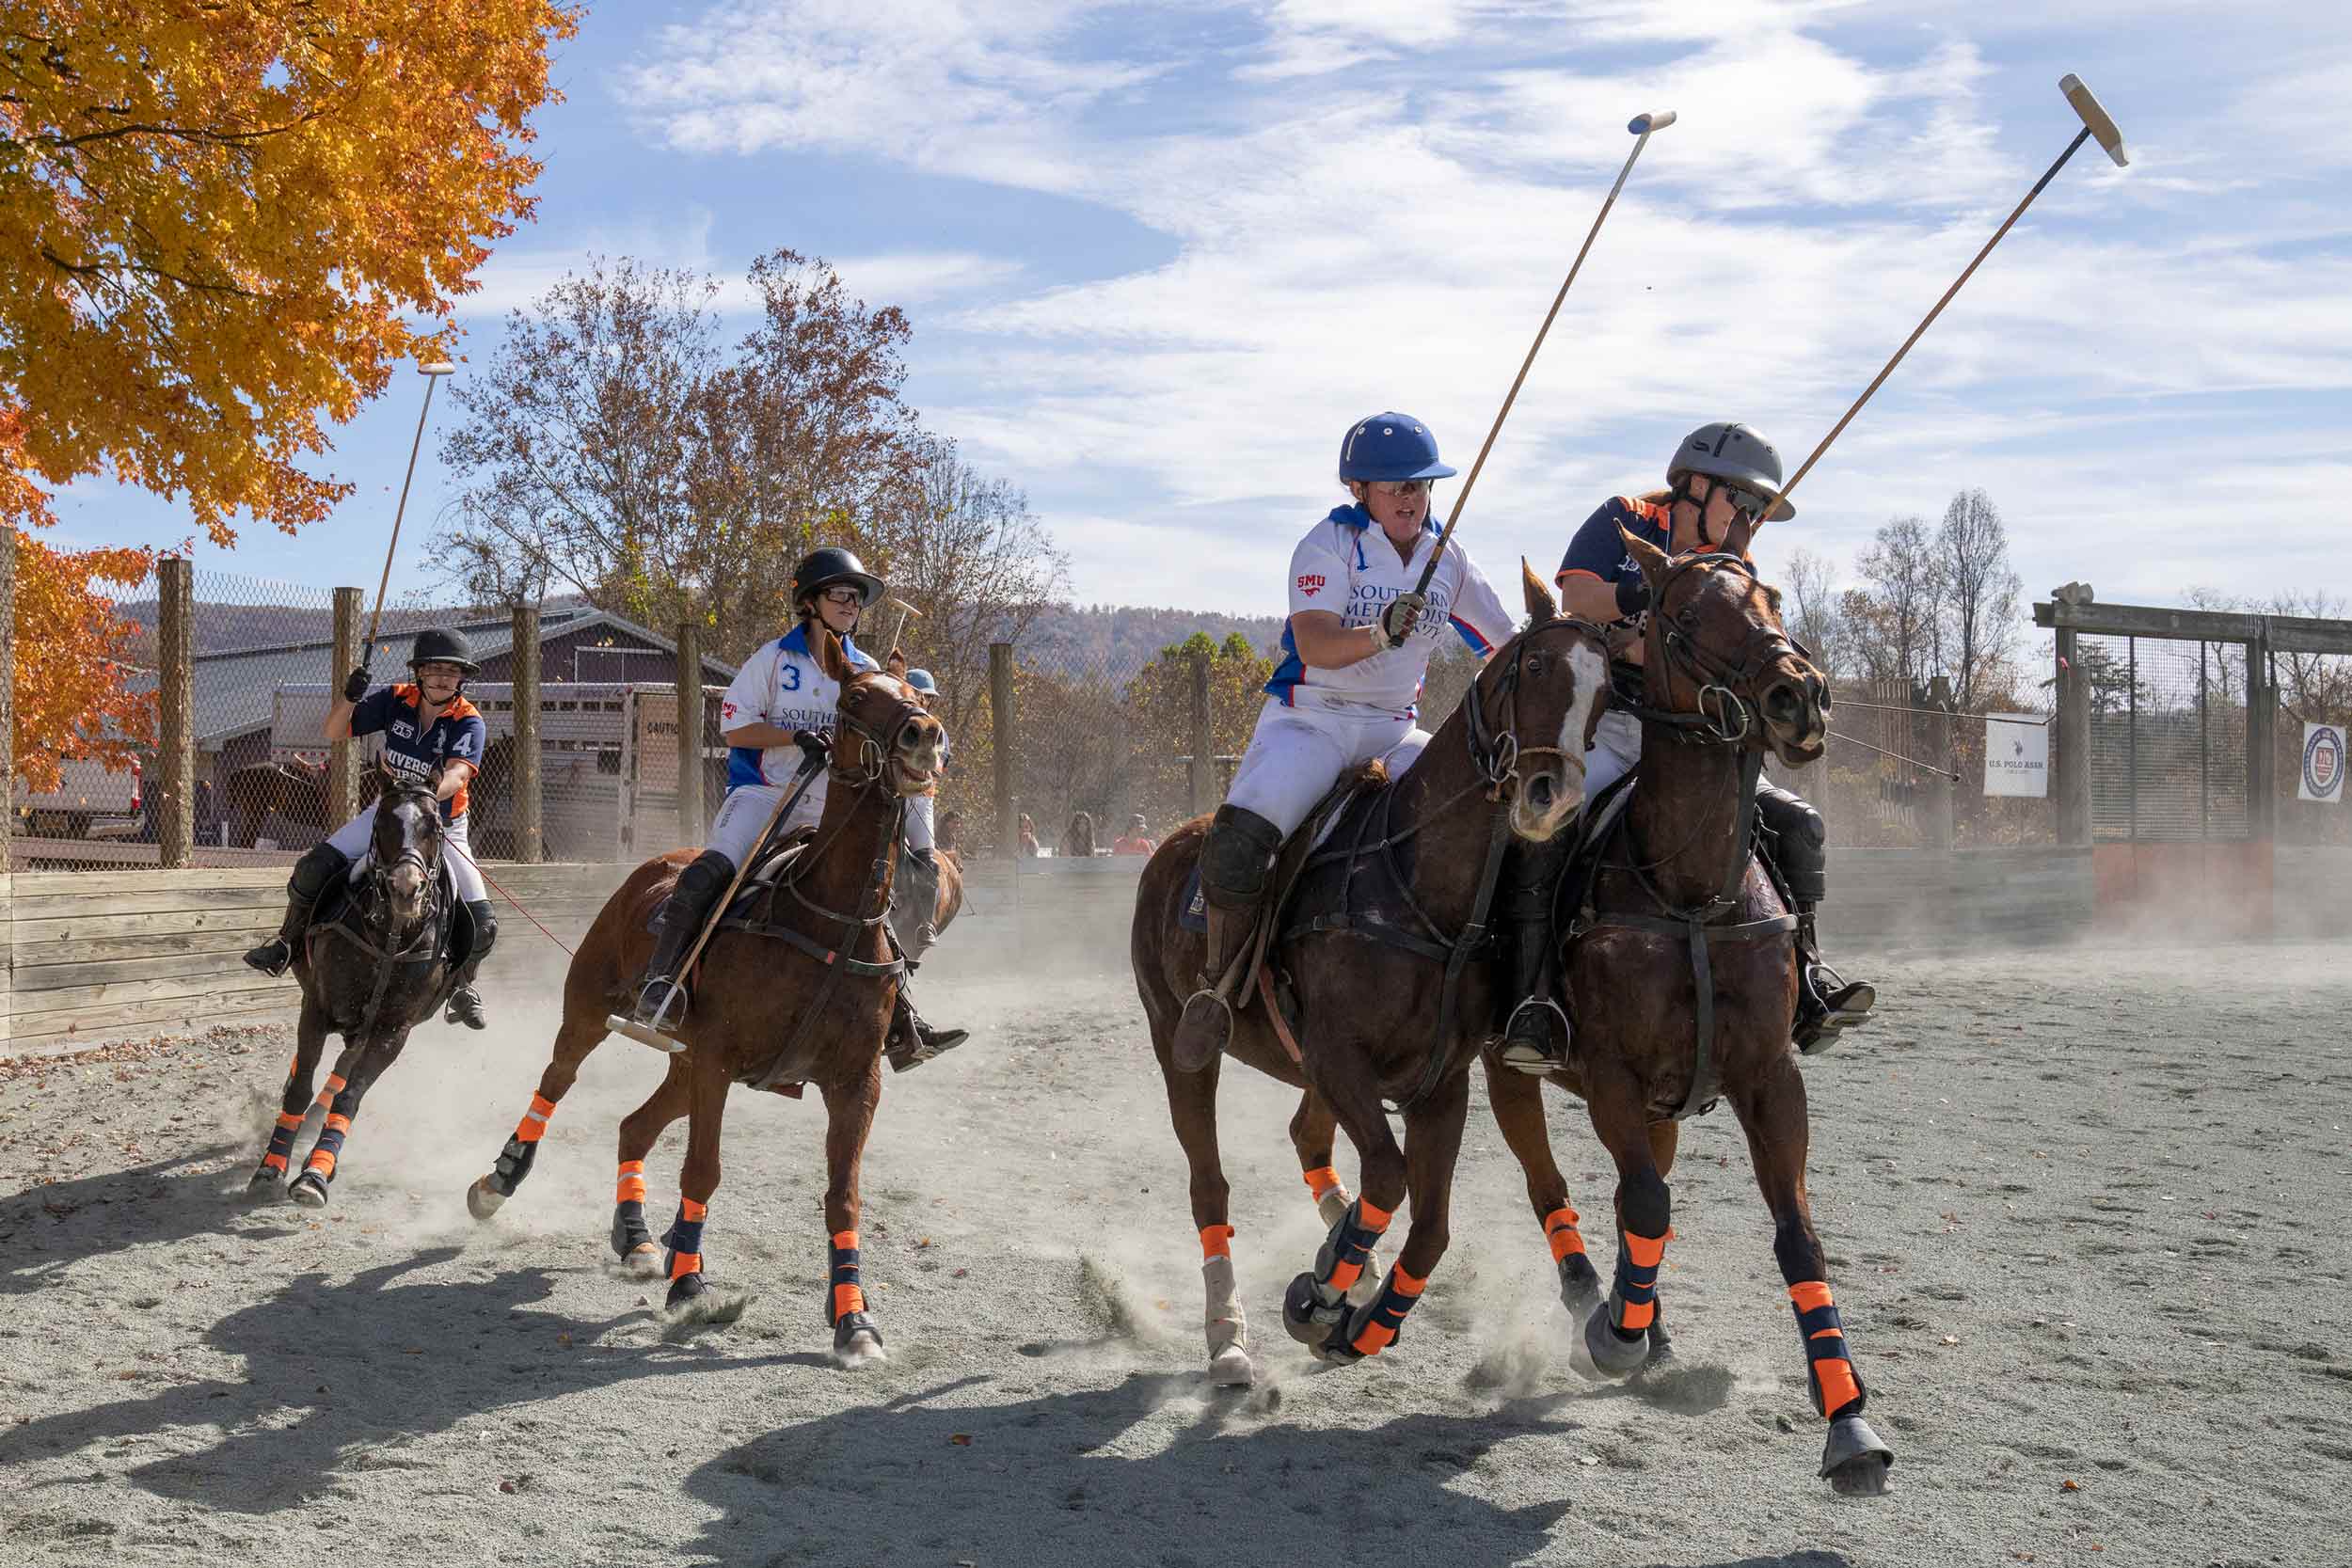 UVA polo players on horses going after ball against opponents